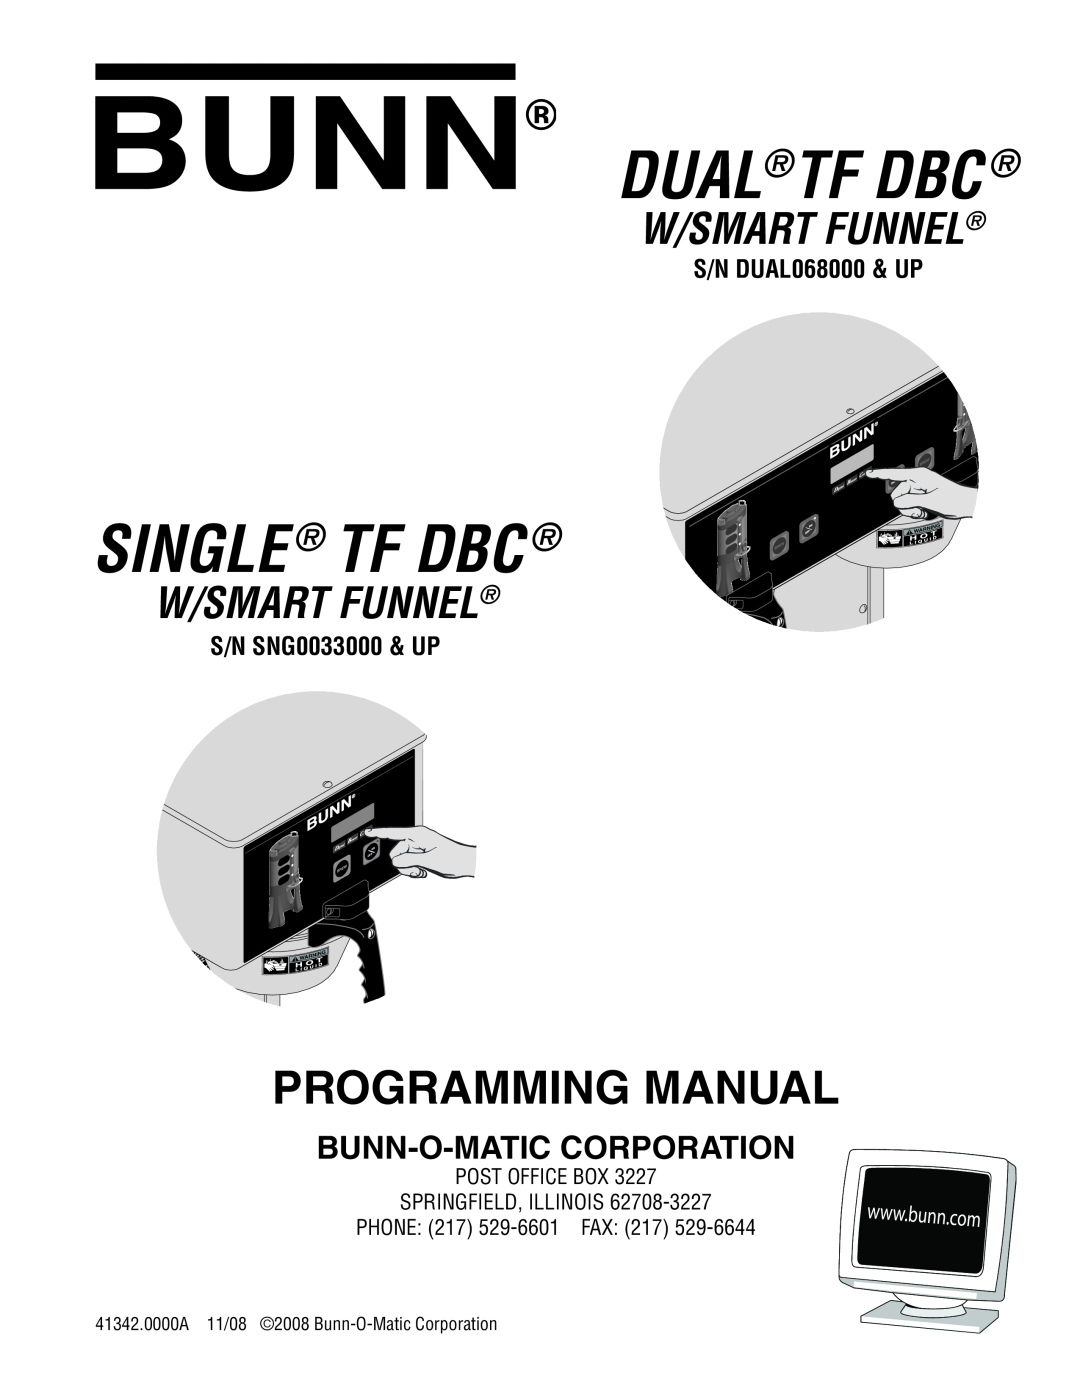 Bunn manual S/N DUAL068000 & UP, Dual Sh Dbc, Installation & Operating Guide, With Smart Funnel 